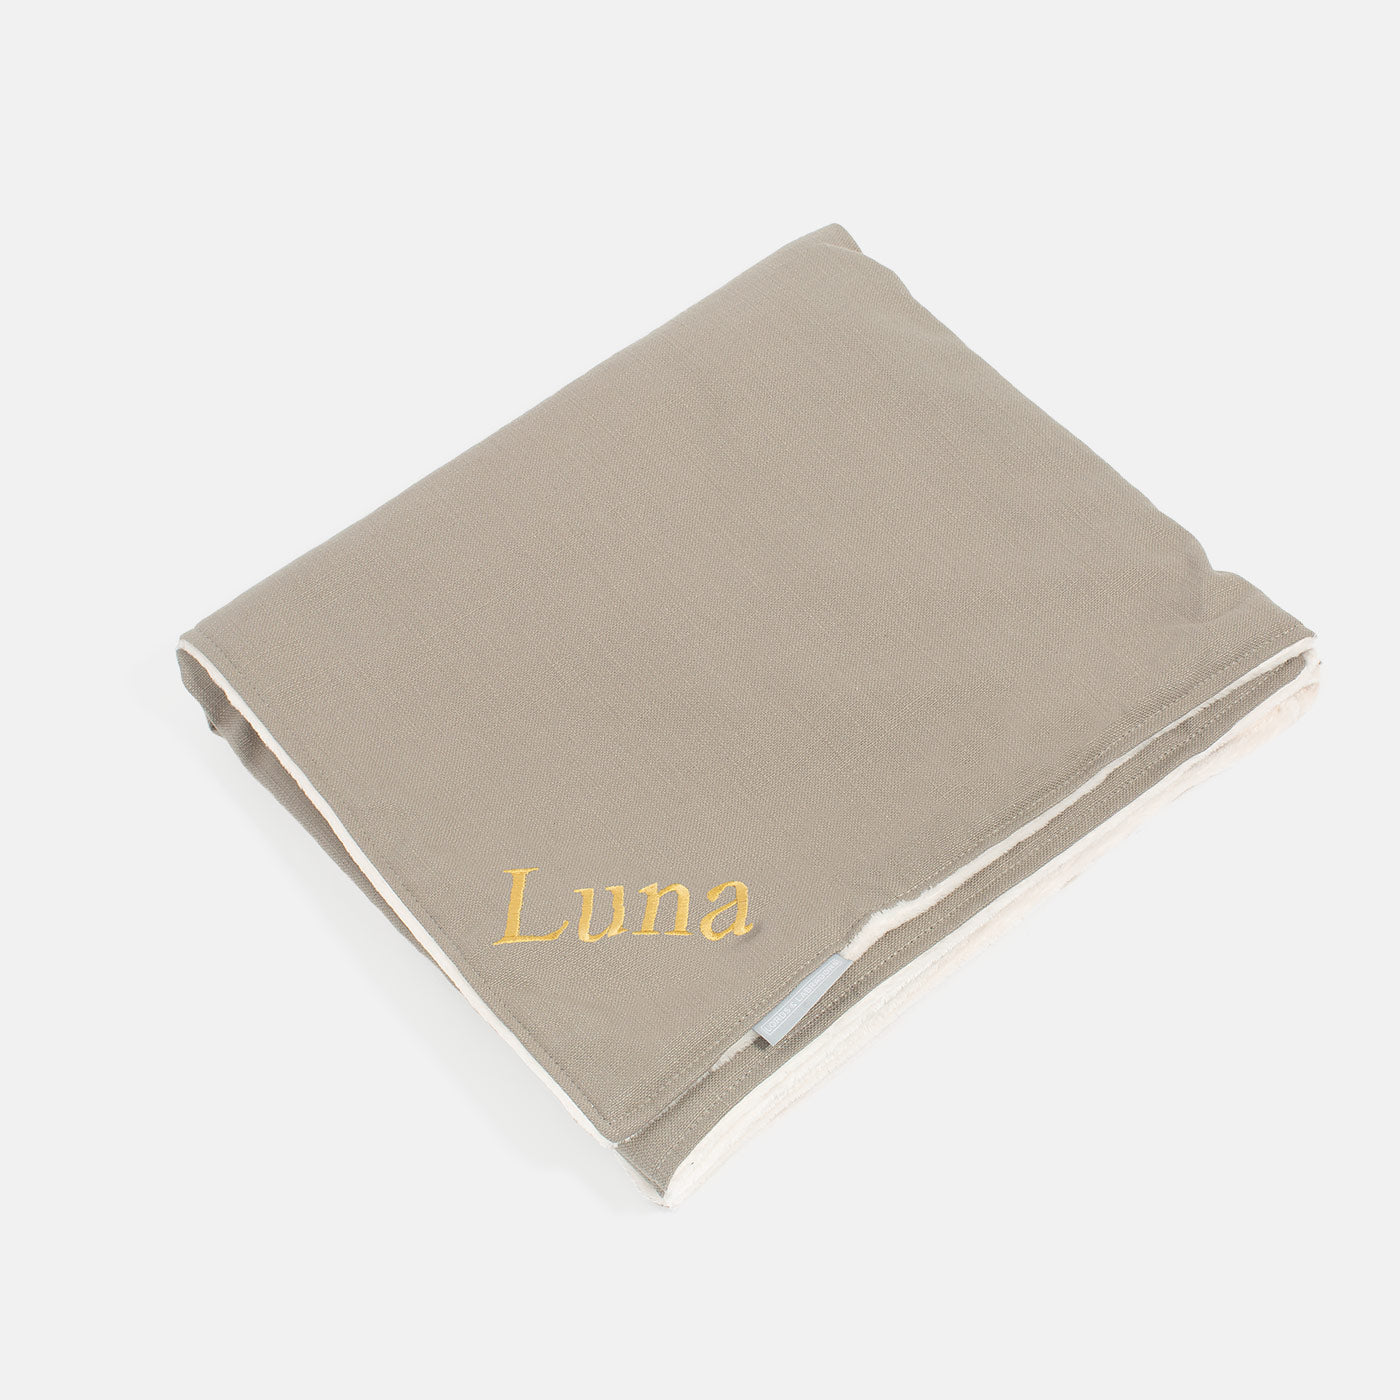 [color:savanna stone] Super Soft Sherpa & Teddy Fleece Lining, Our Luxury Cat & Kitten Blanket In Stunning Savanna Stone The Perfect Cat Bed Accessory! Available To Personalize at Lords & Labradors US